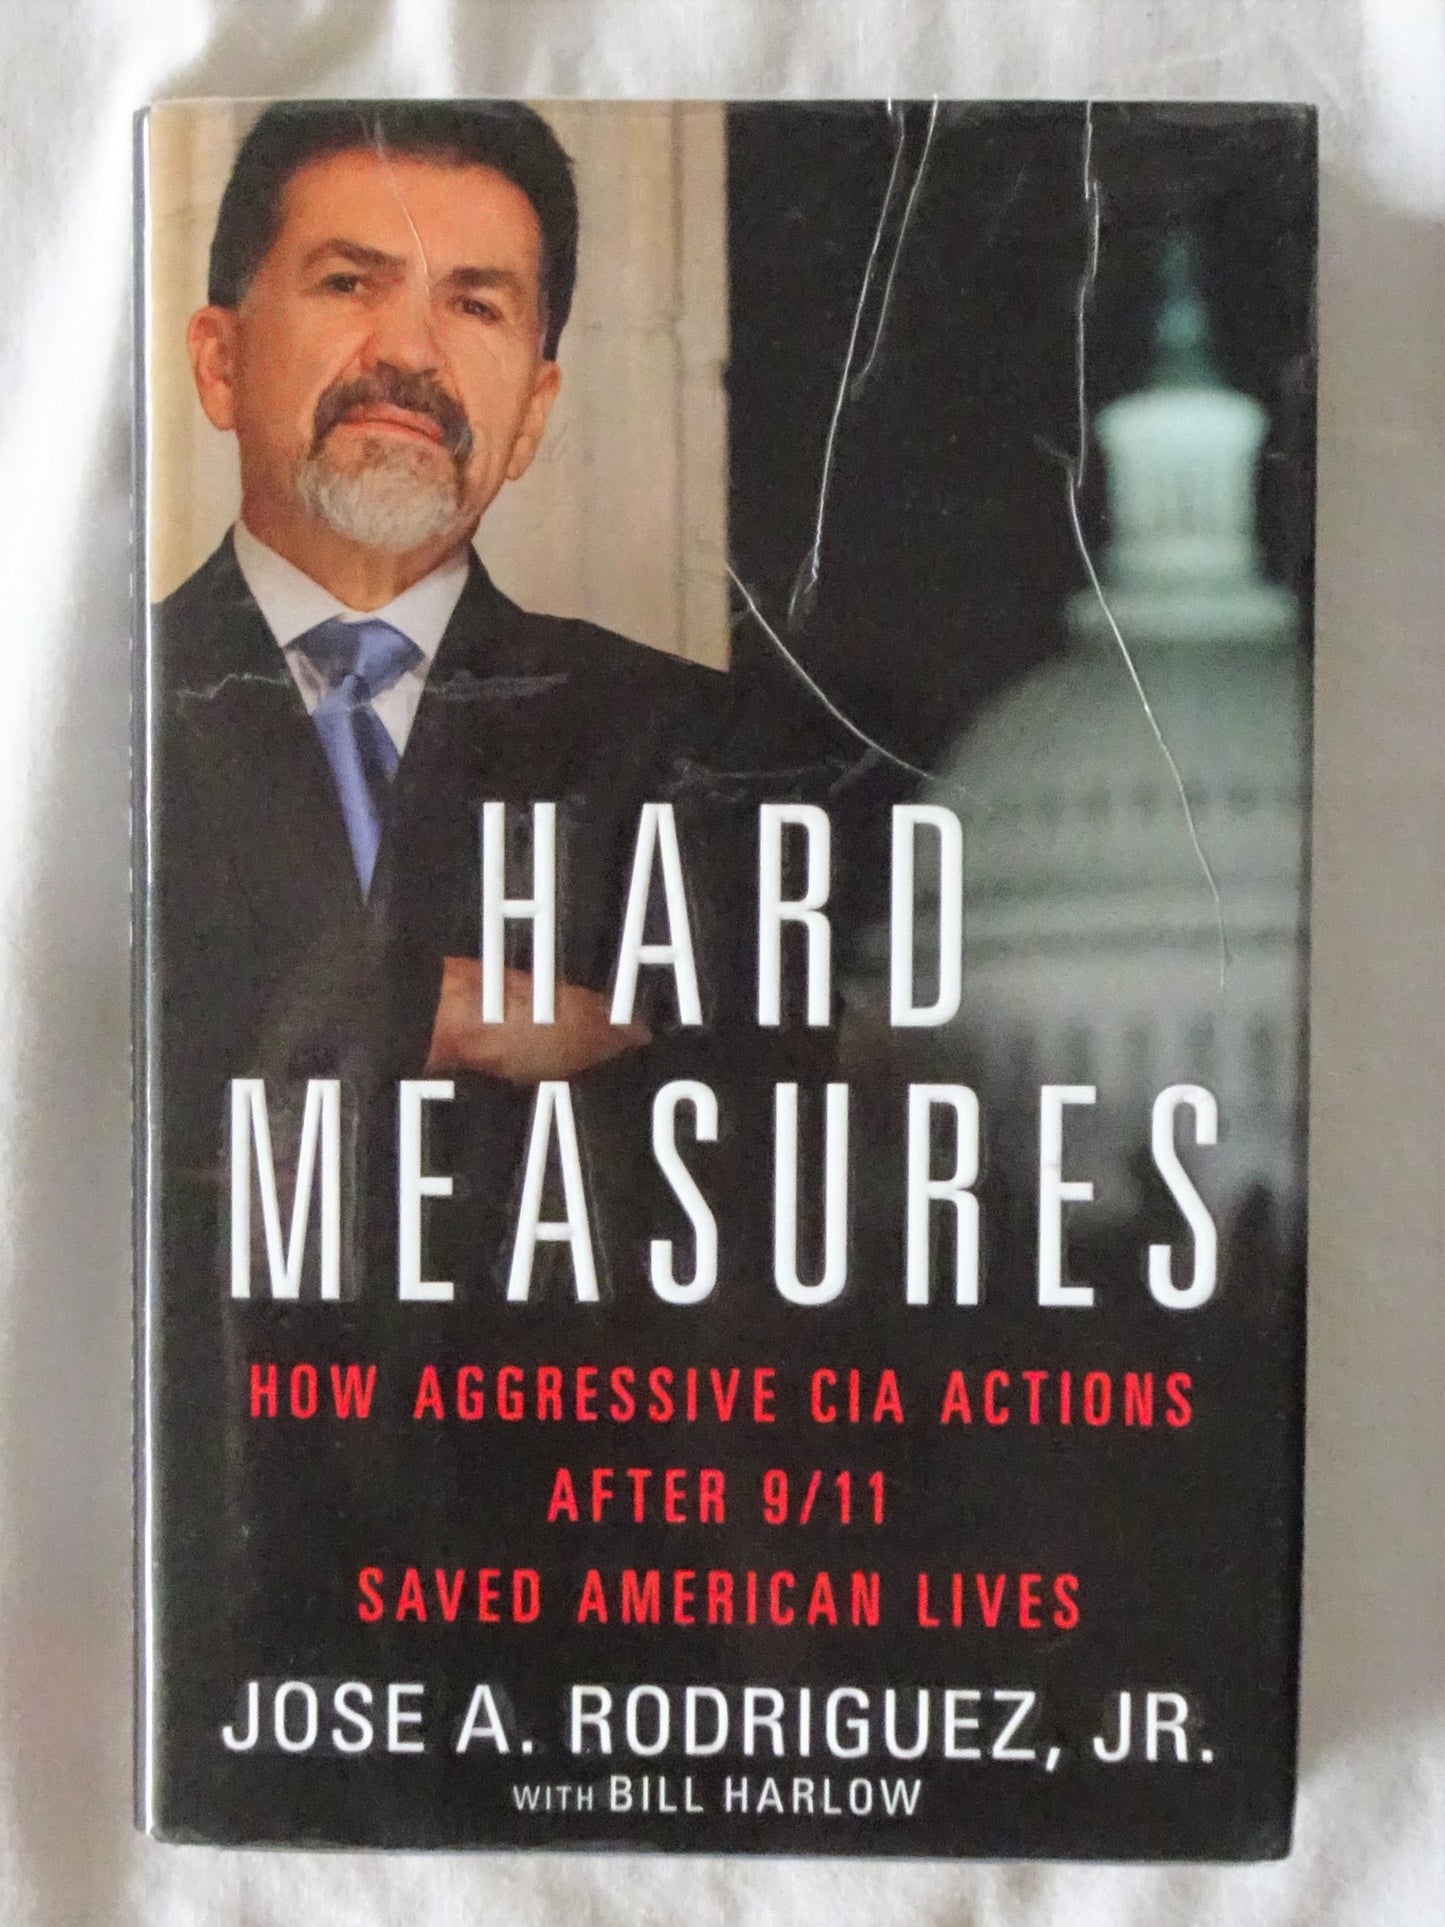 Hard Measures  How aggressive CIA actions after 9/11 saved American lives.  by Jose A. Rodriguez, Jr. with Bill Harlow